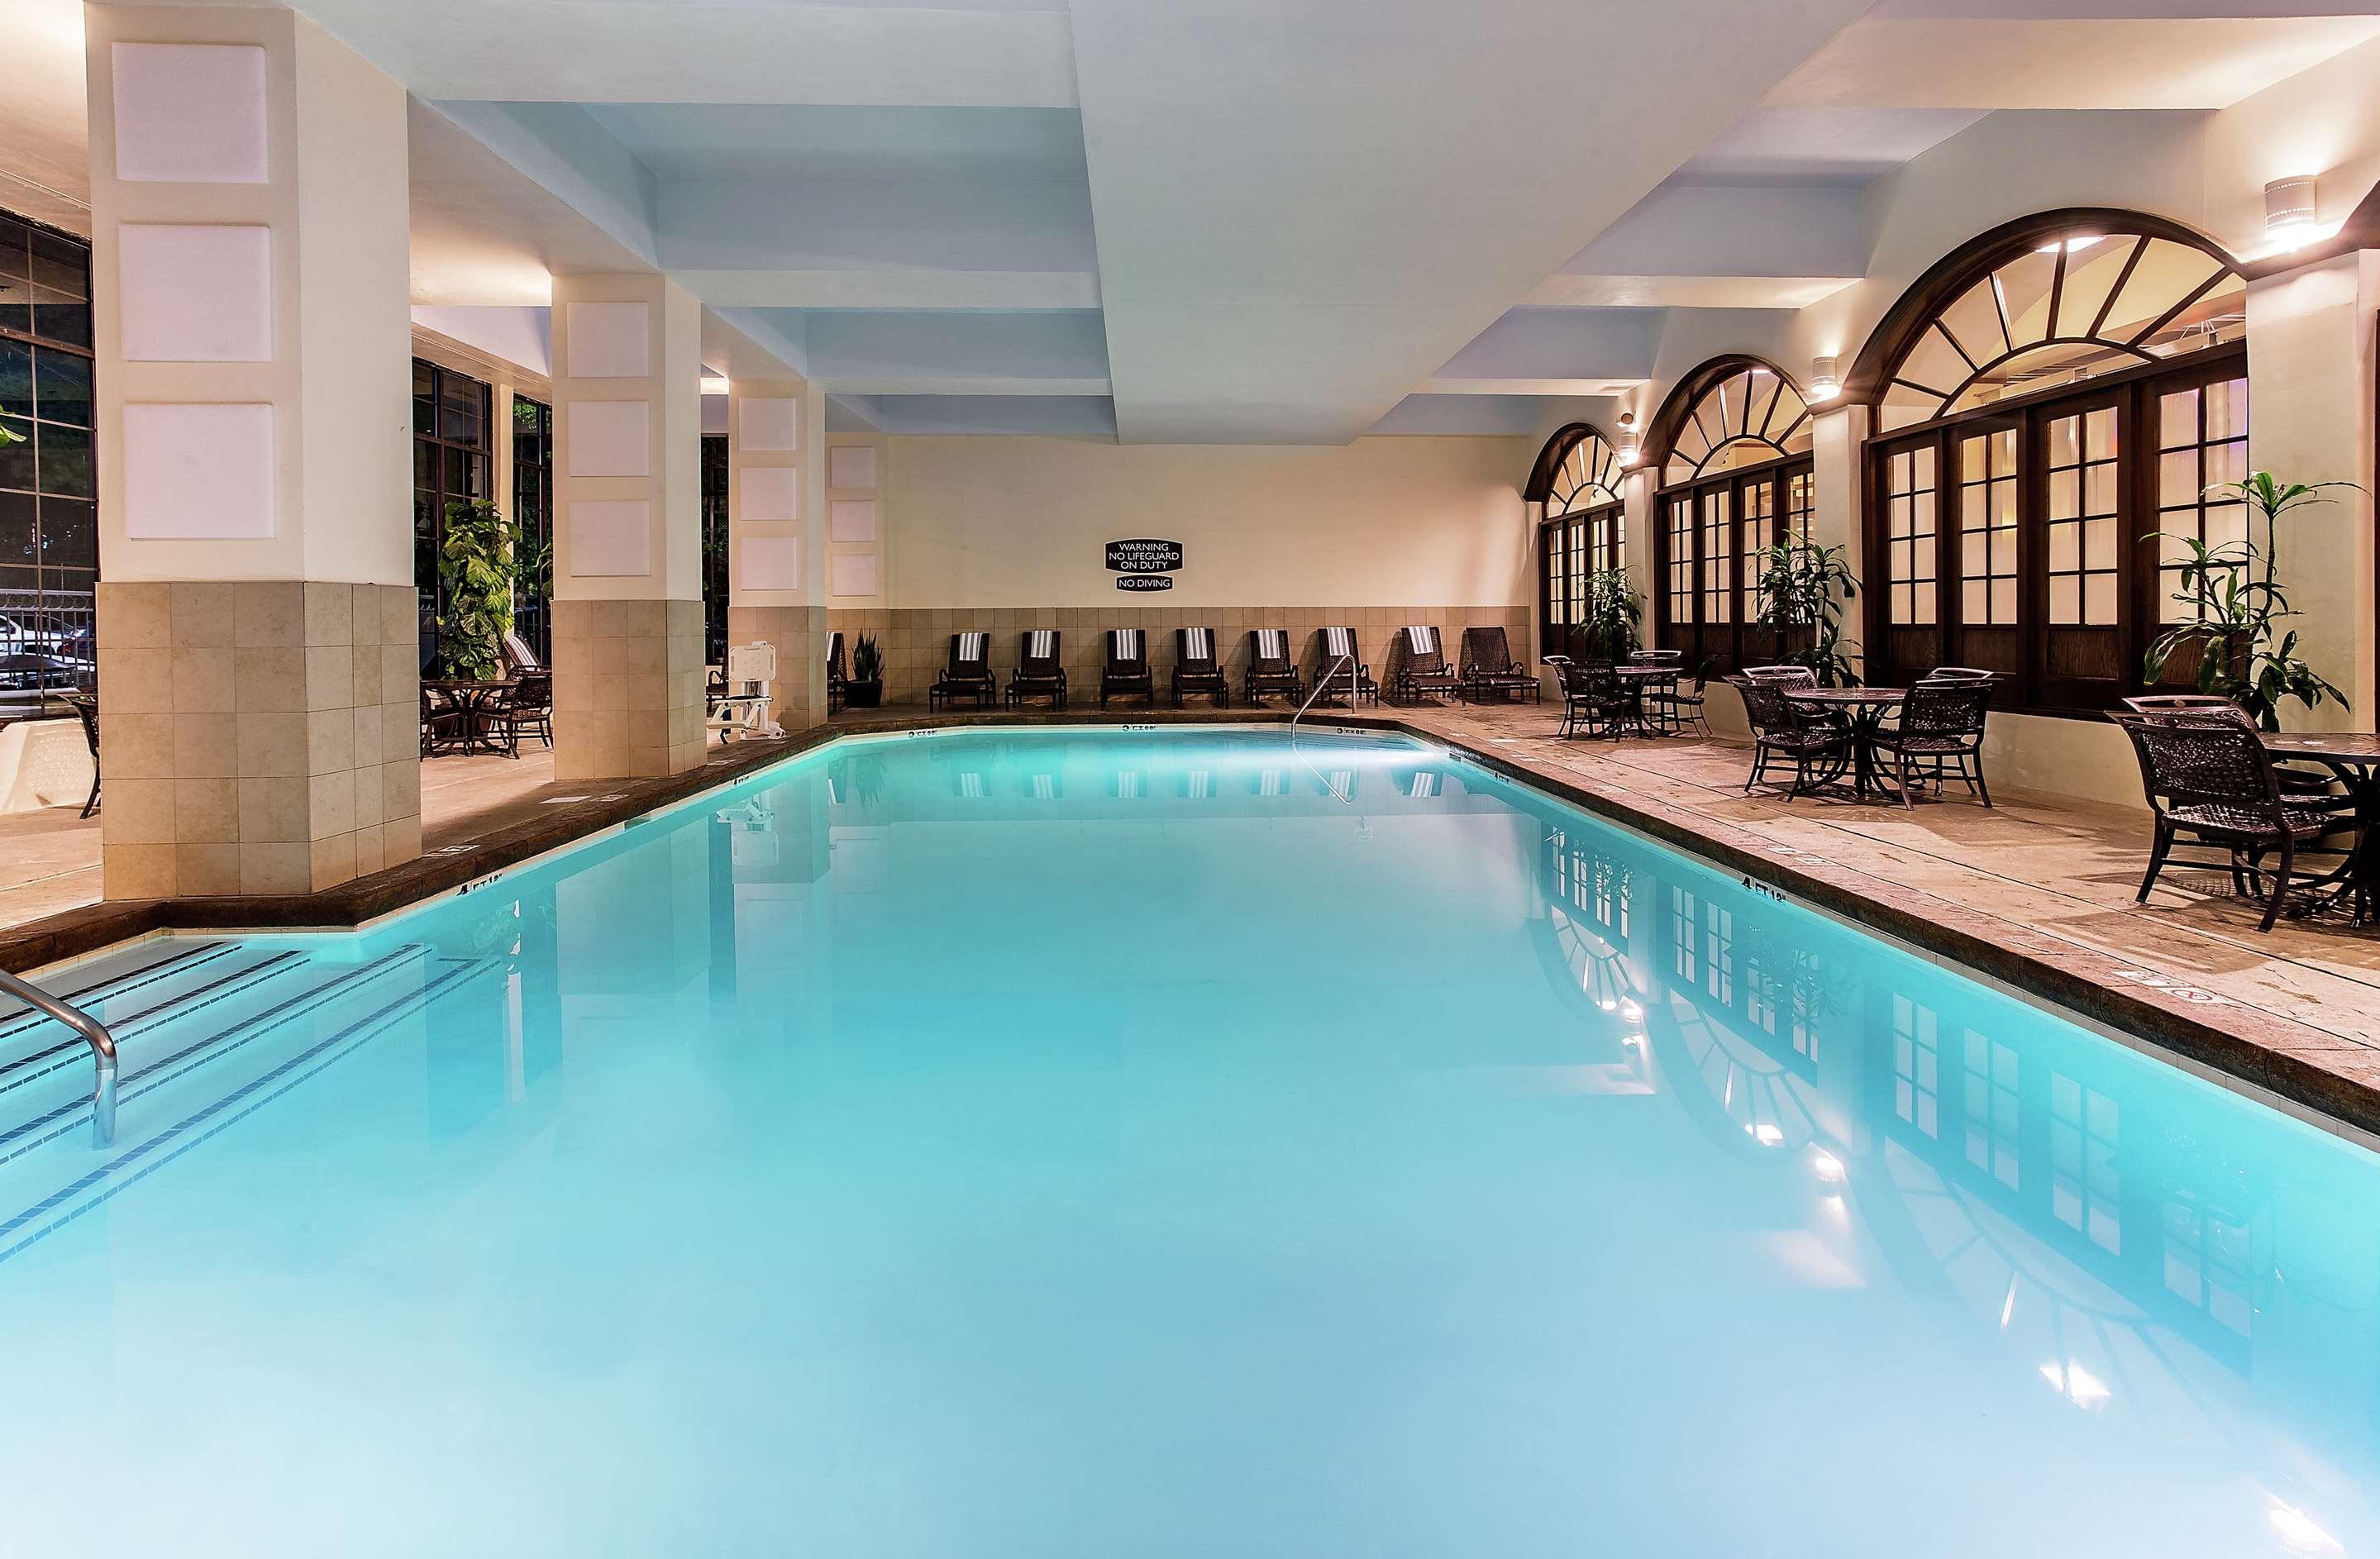 Embassy Suites Hot Springs - Hotel & Spa, Hot Springs | Best Deals @Holidify